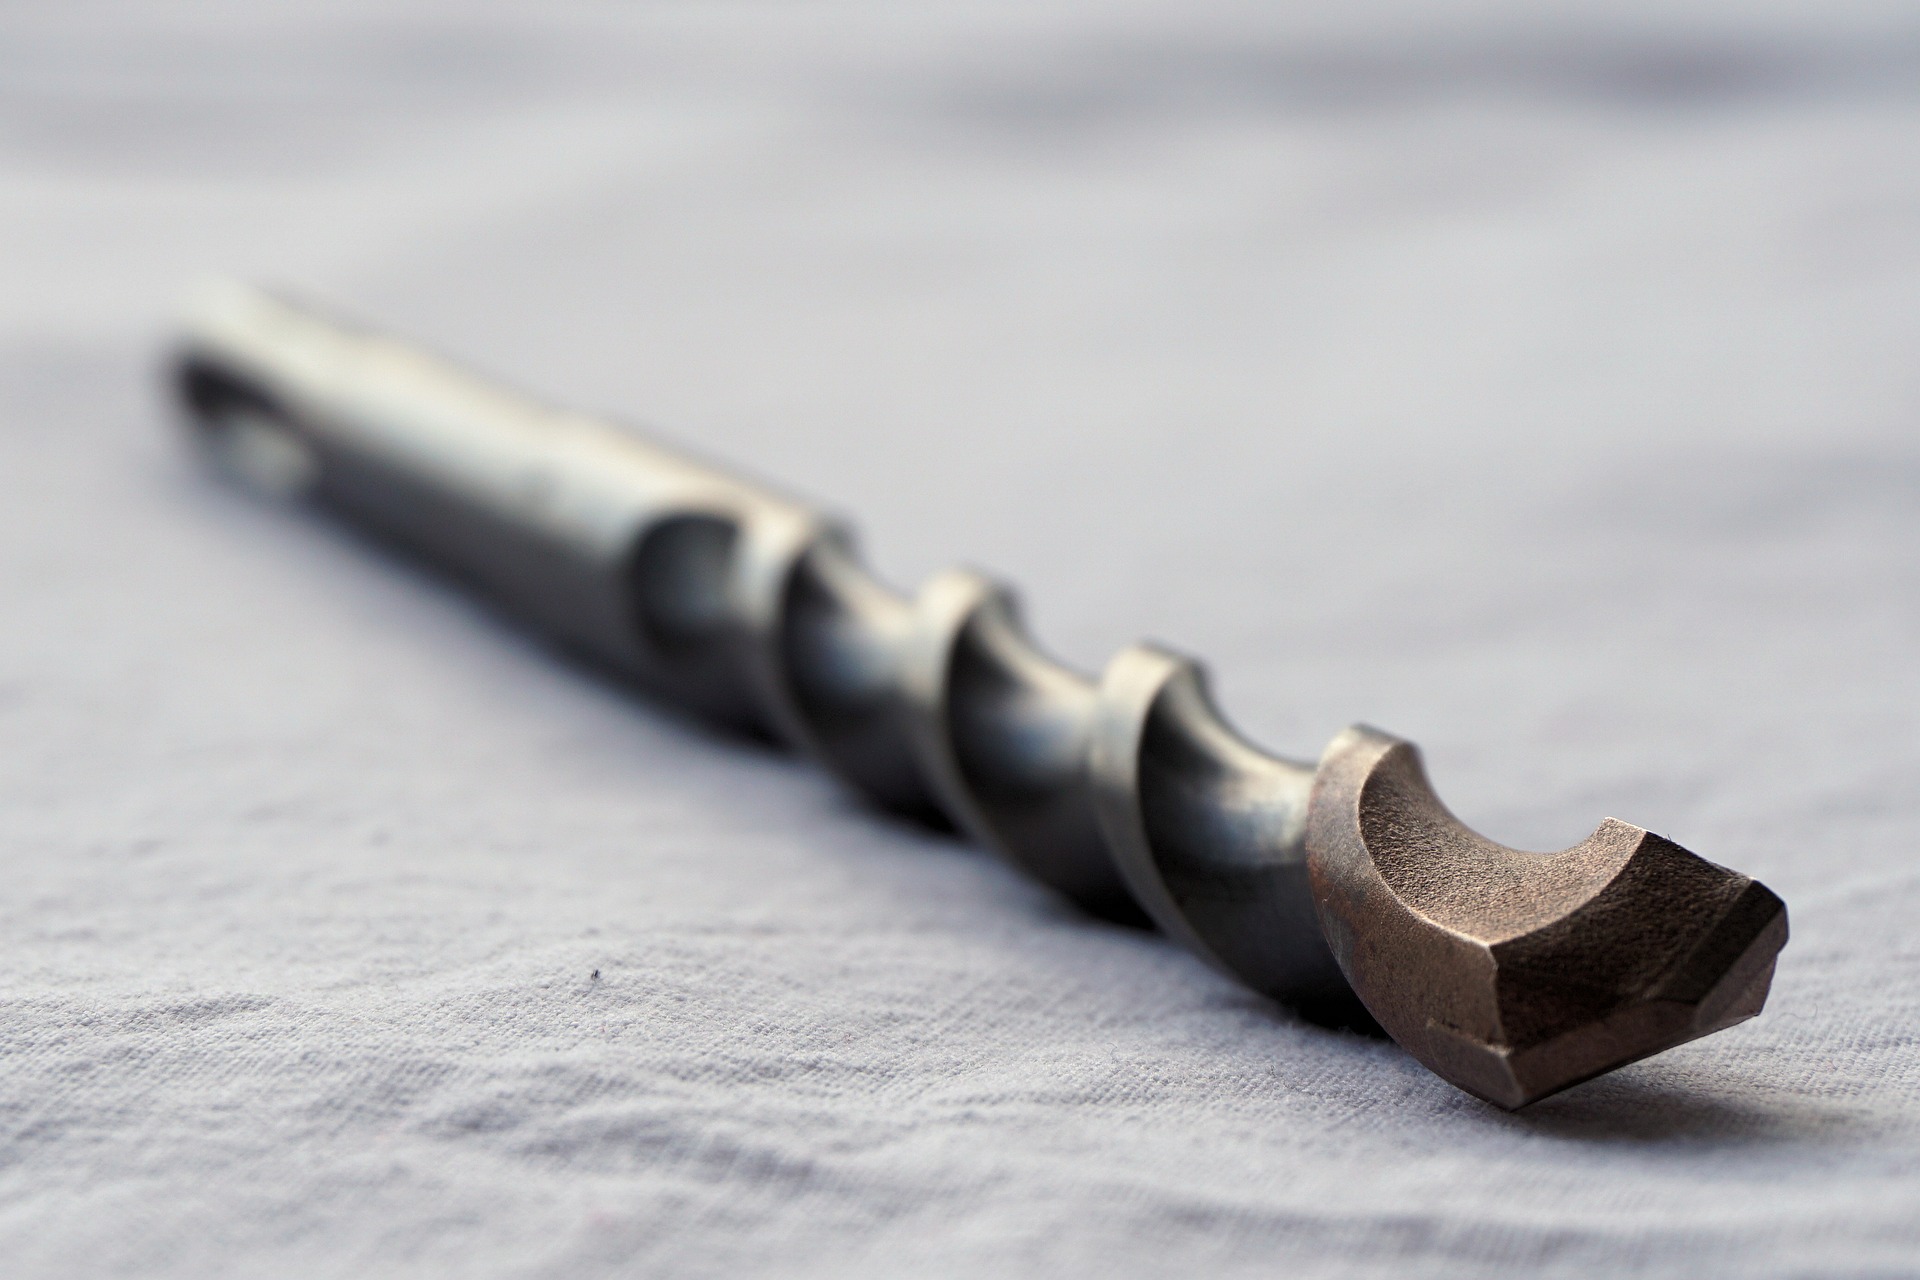 Close up image of a drill bit